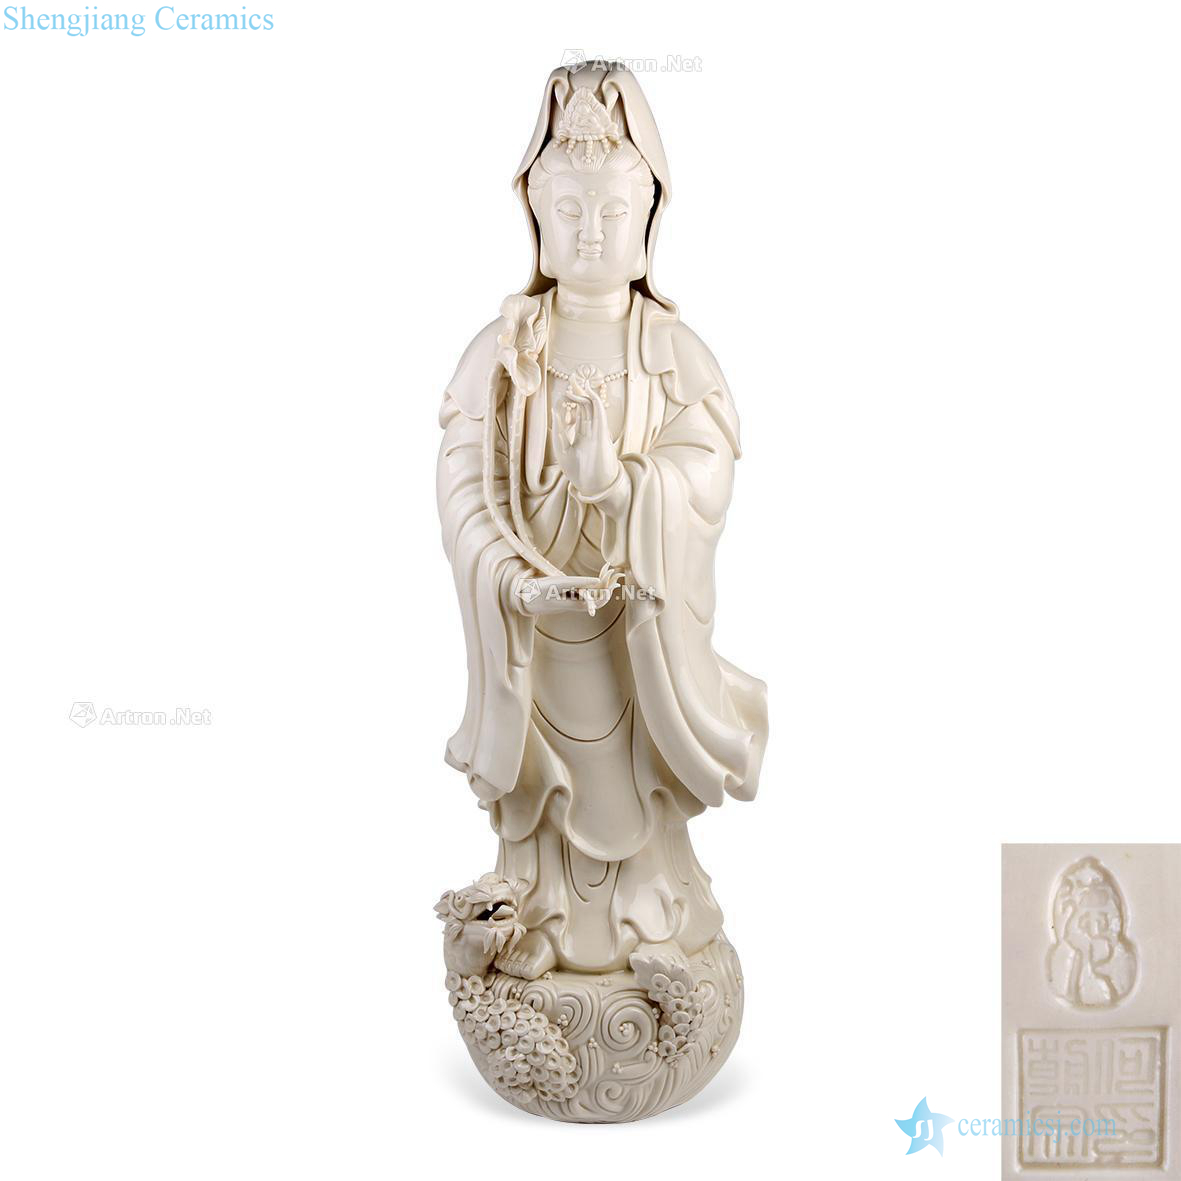 Across the sea goddess of mercy stands resemble dehua kiln in Ming dynasty